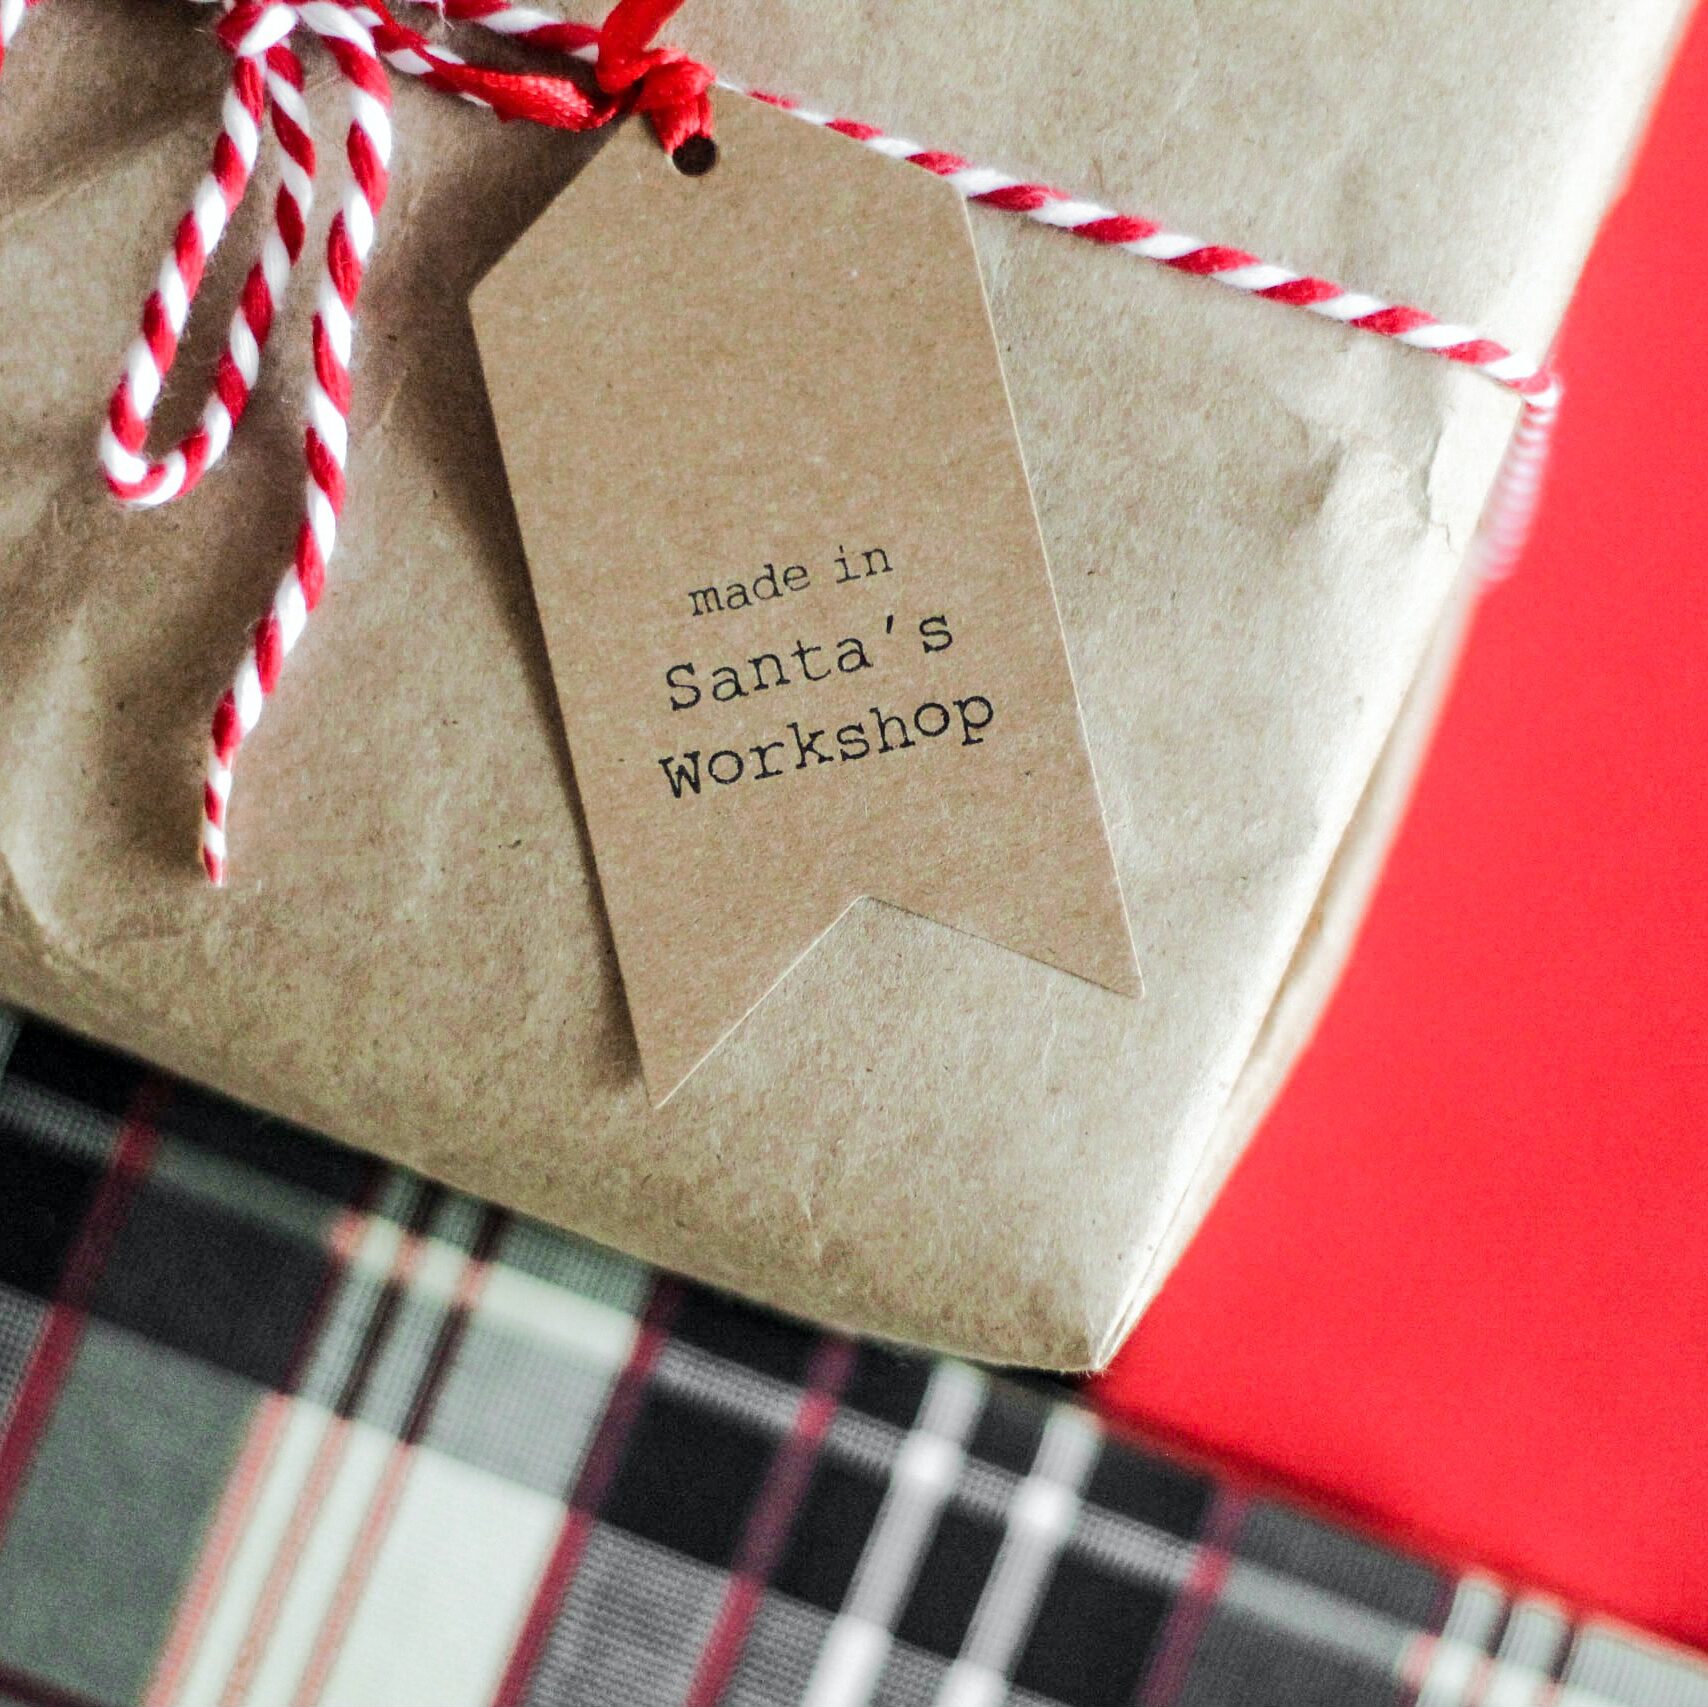 A Christmas gift wrapped in brown paper wrapping and a red and white striped string with a gift label that reads "made in Santa's workshop" on top of a red table.